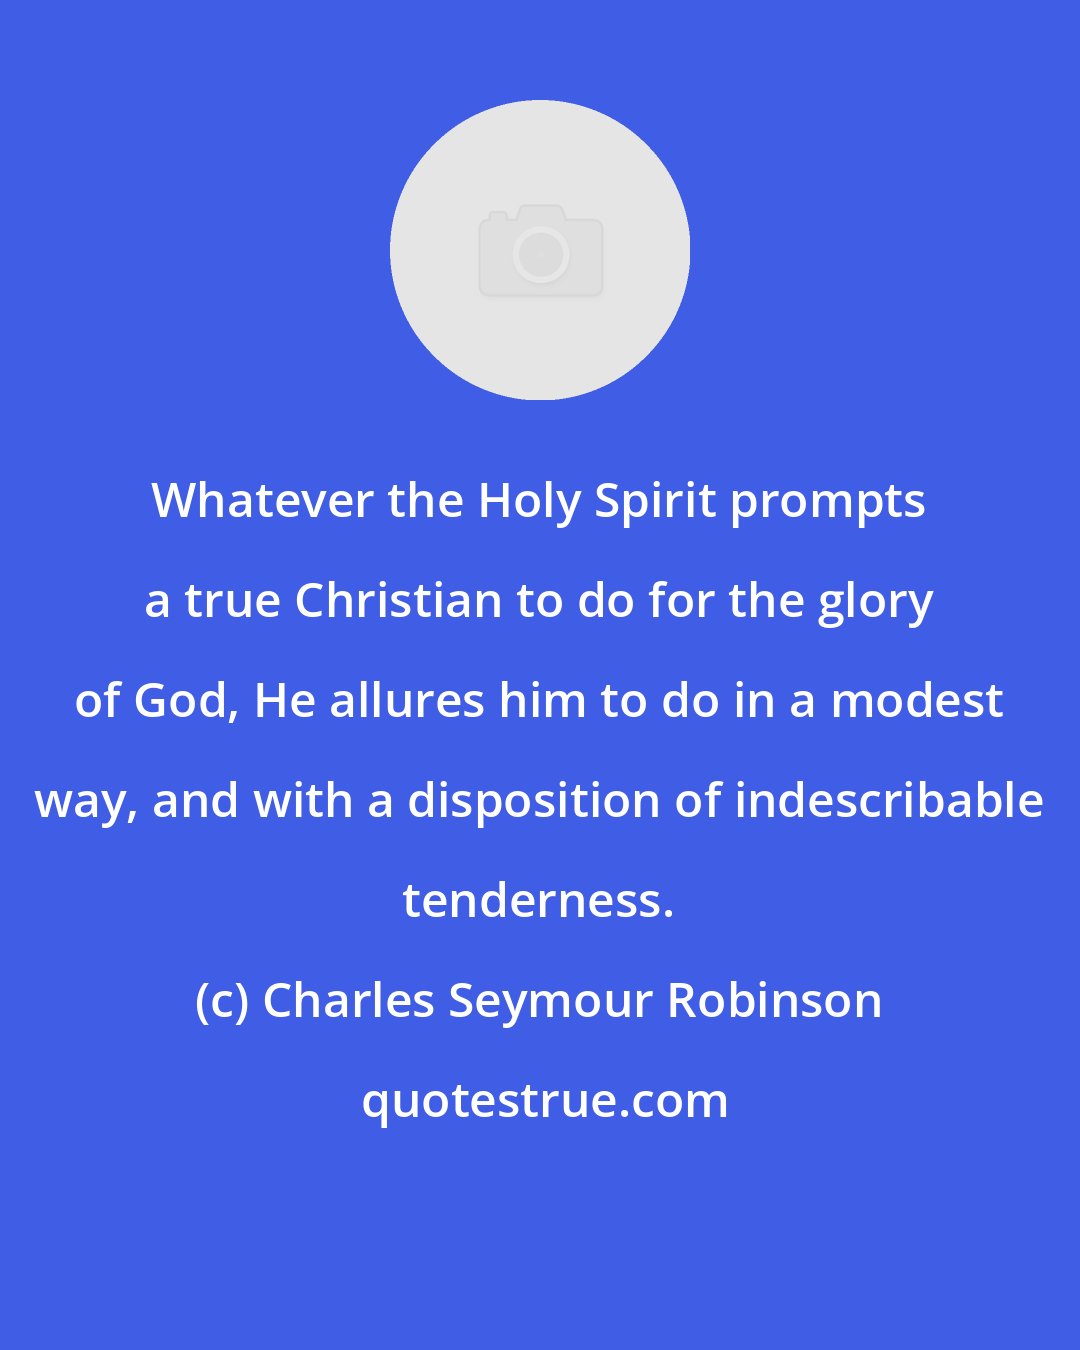 Charles Seymour Robinson: Whatever the Holy Spirit prompts a true Christian to do for the glory of God, He allures him to do in a modest way, and with a disposition of indescribable tenderness.